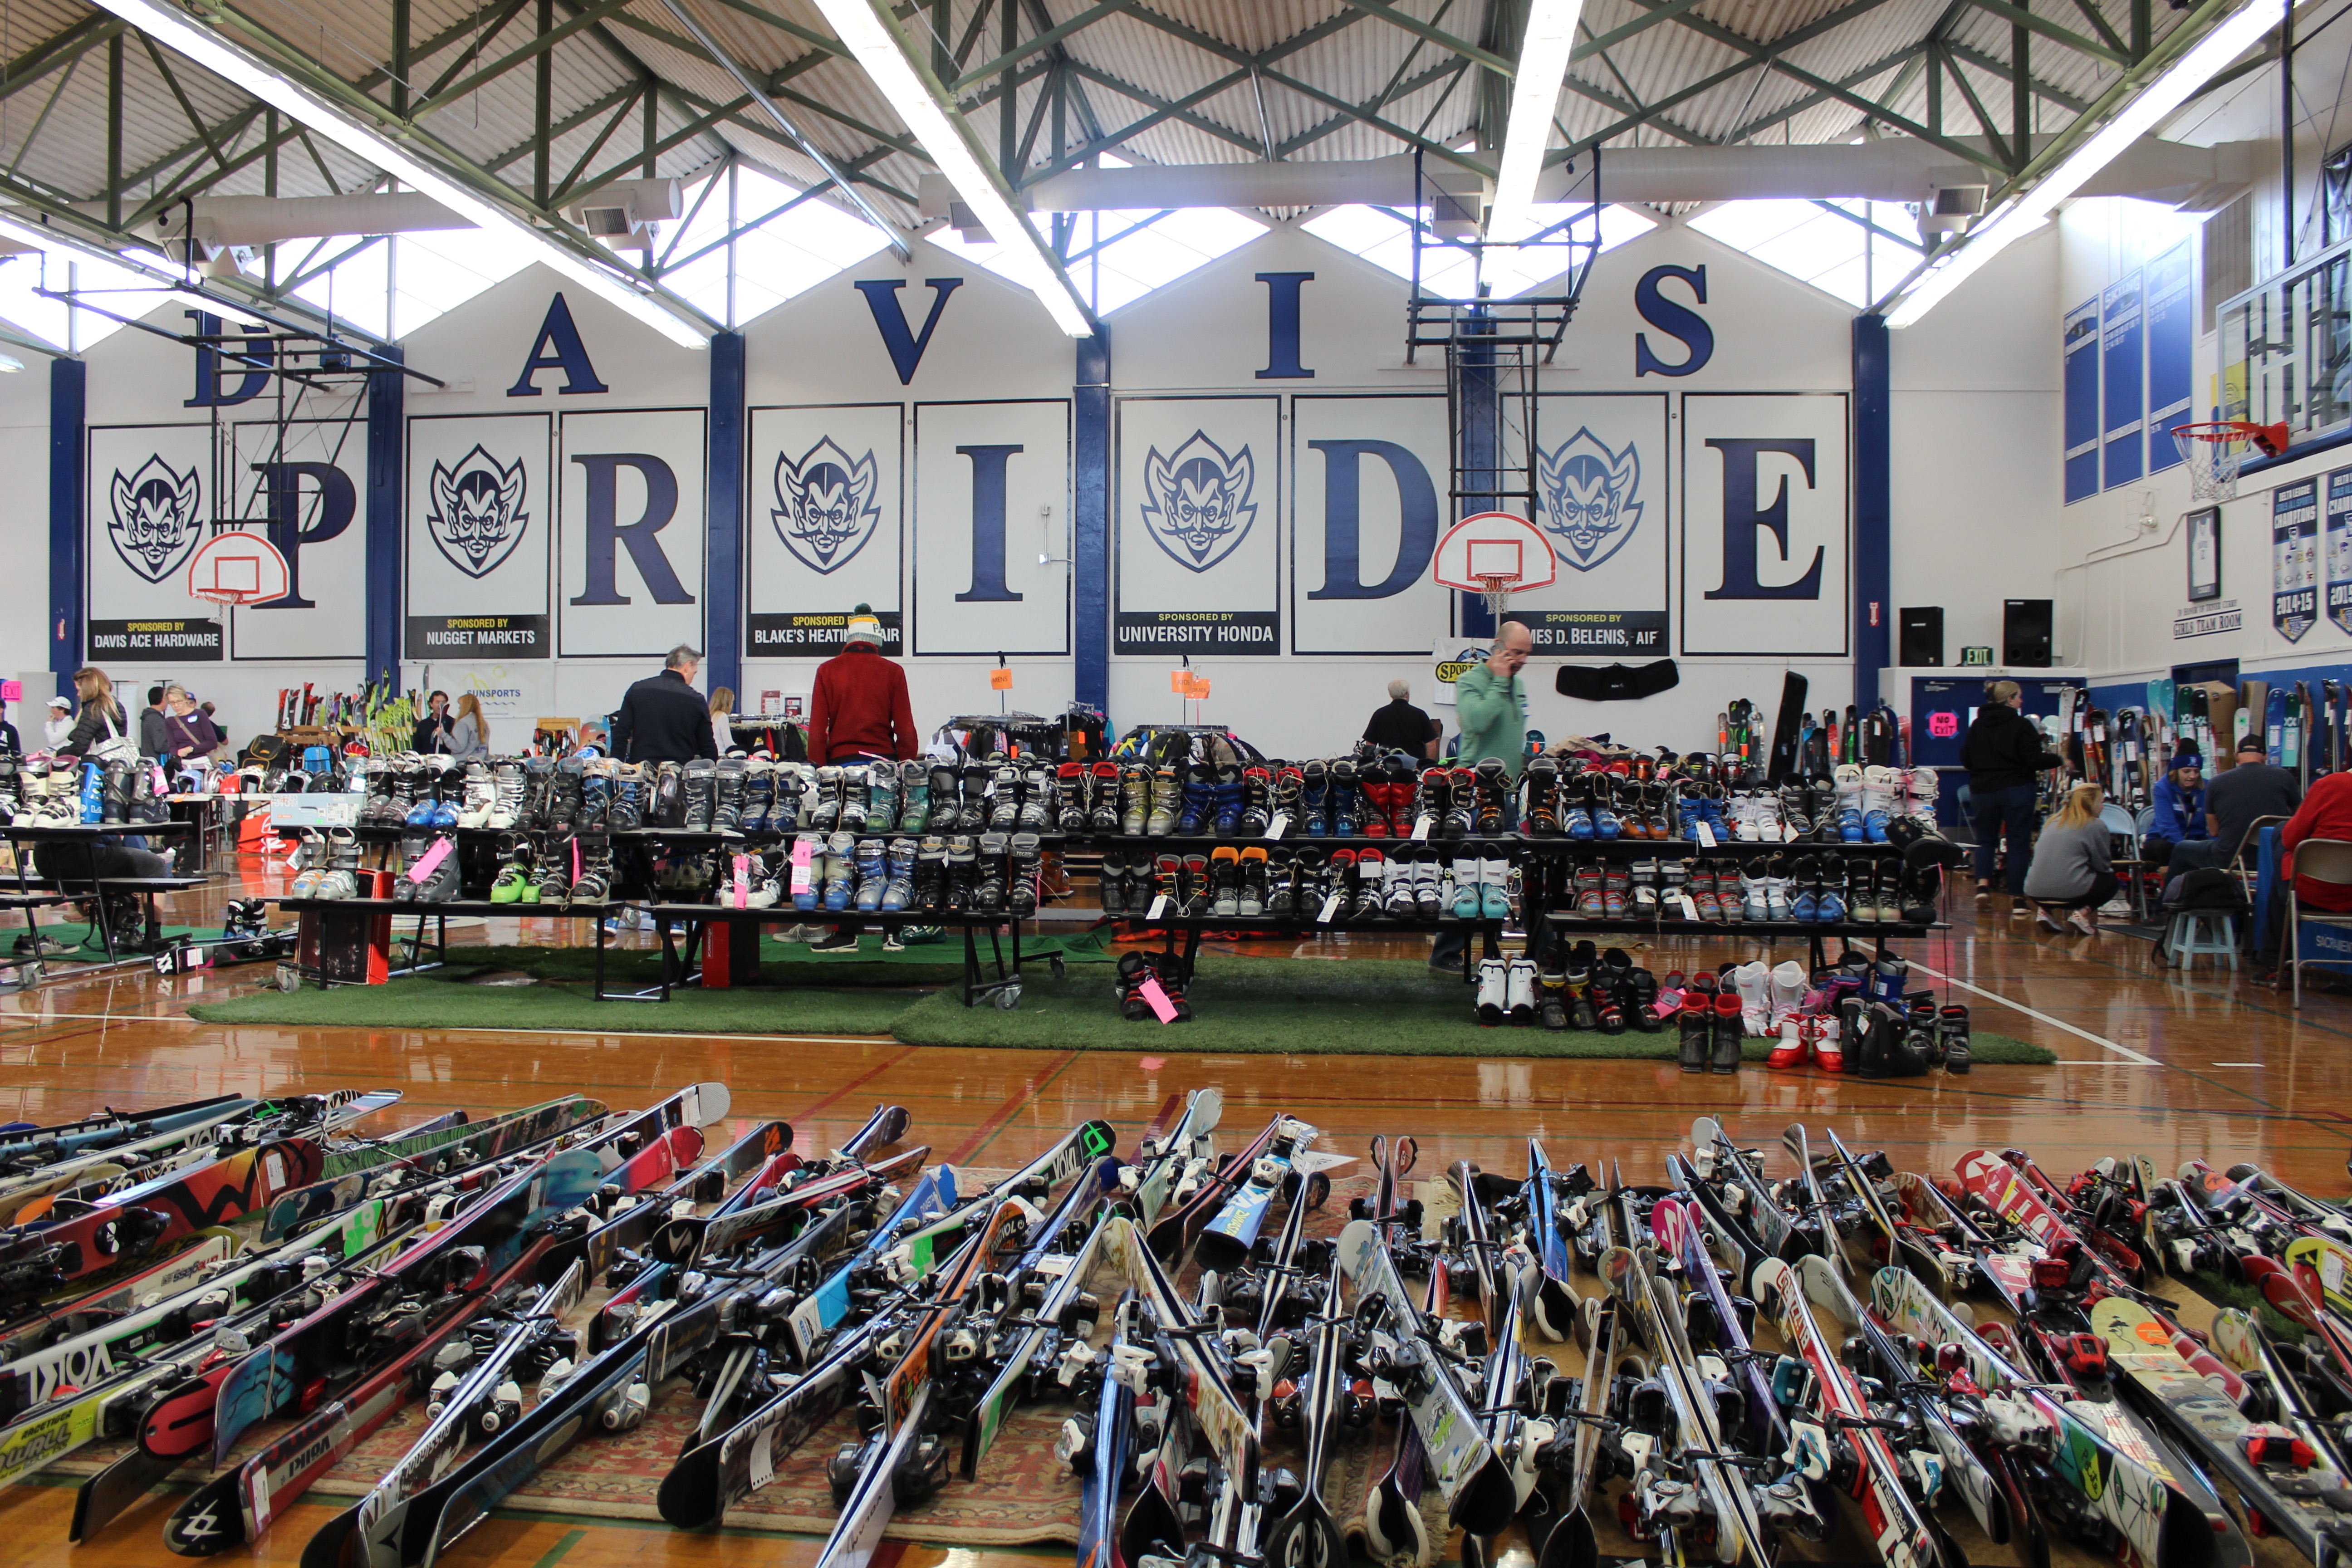 The Davis High Ski Swap offers a large variety of new and used ski equipment for sale